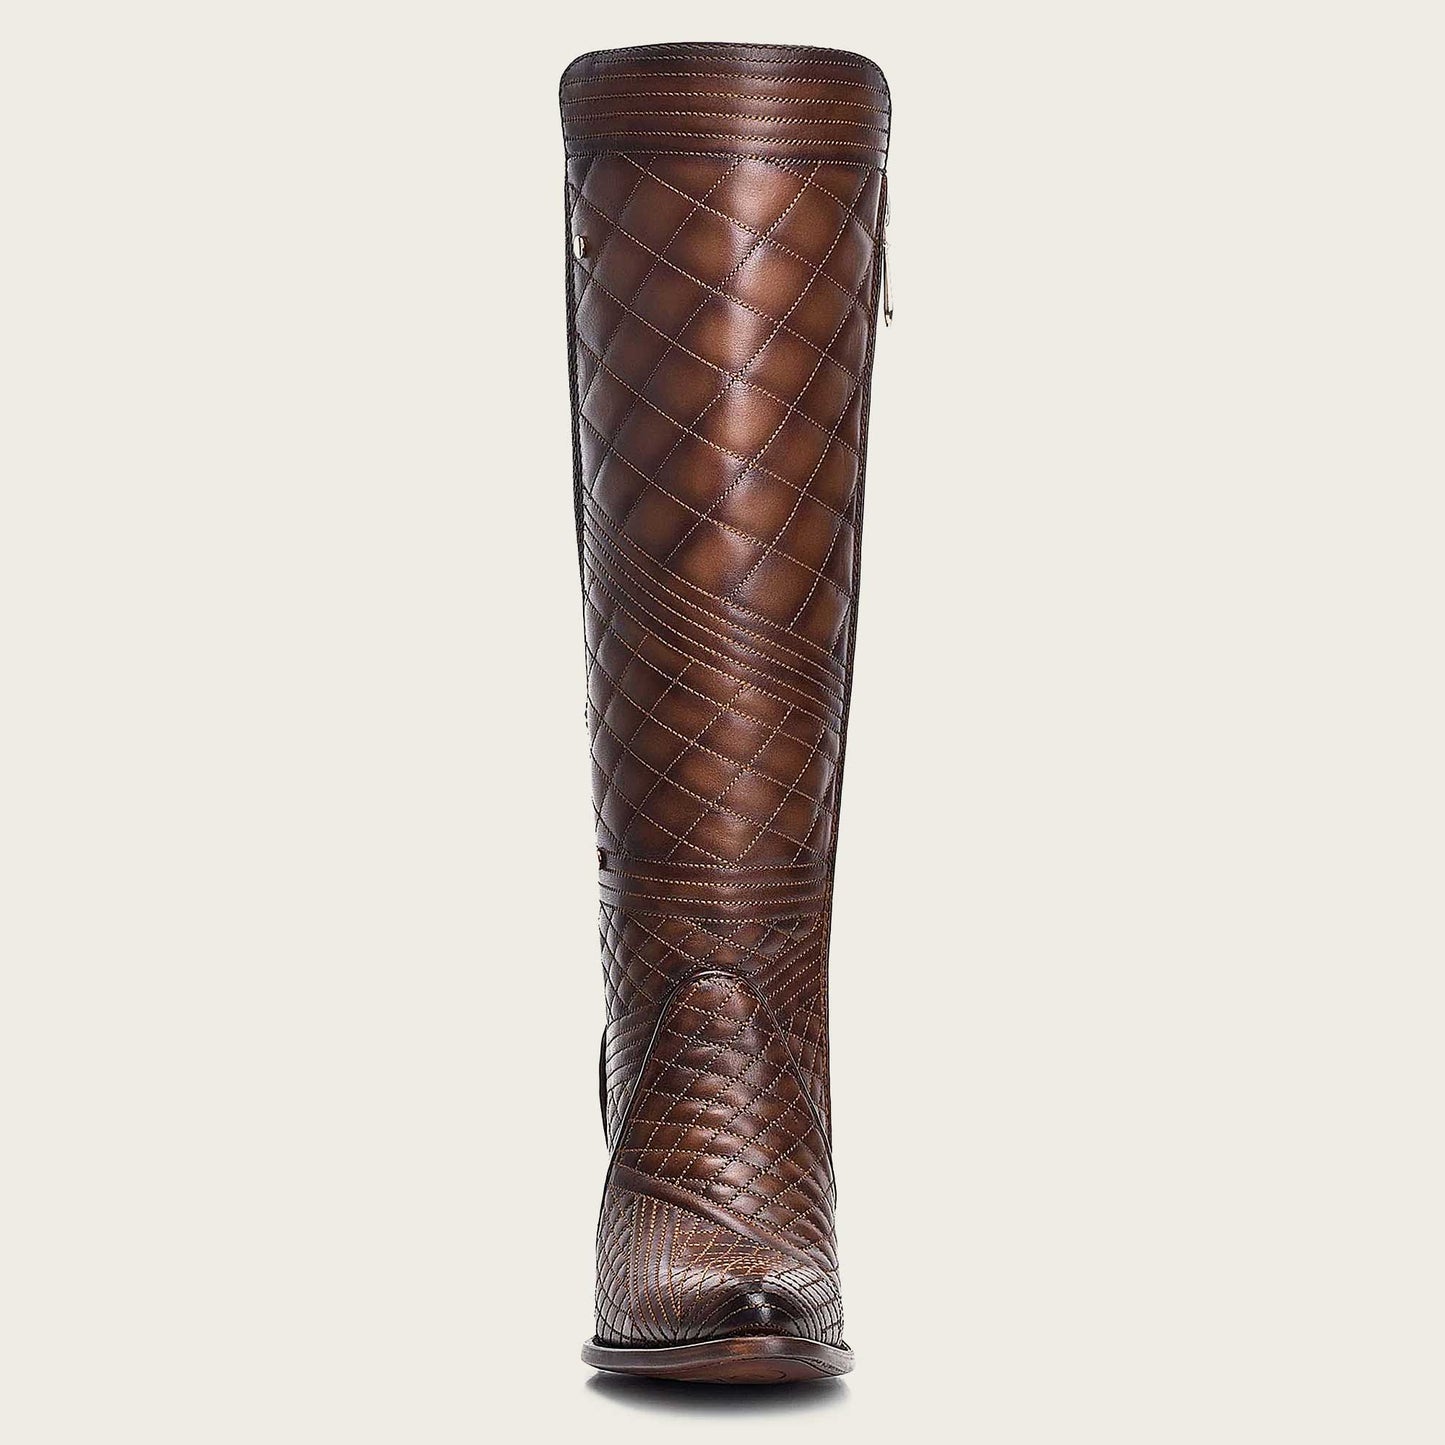 Experience the artistry of exquisite embroidery with these brown leather boots that exude sophistication and charm.